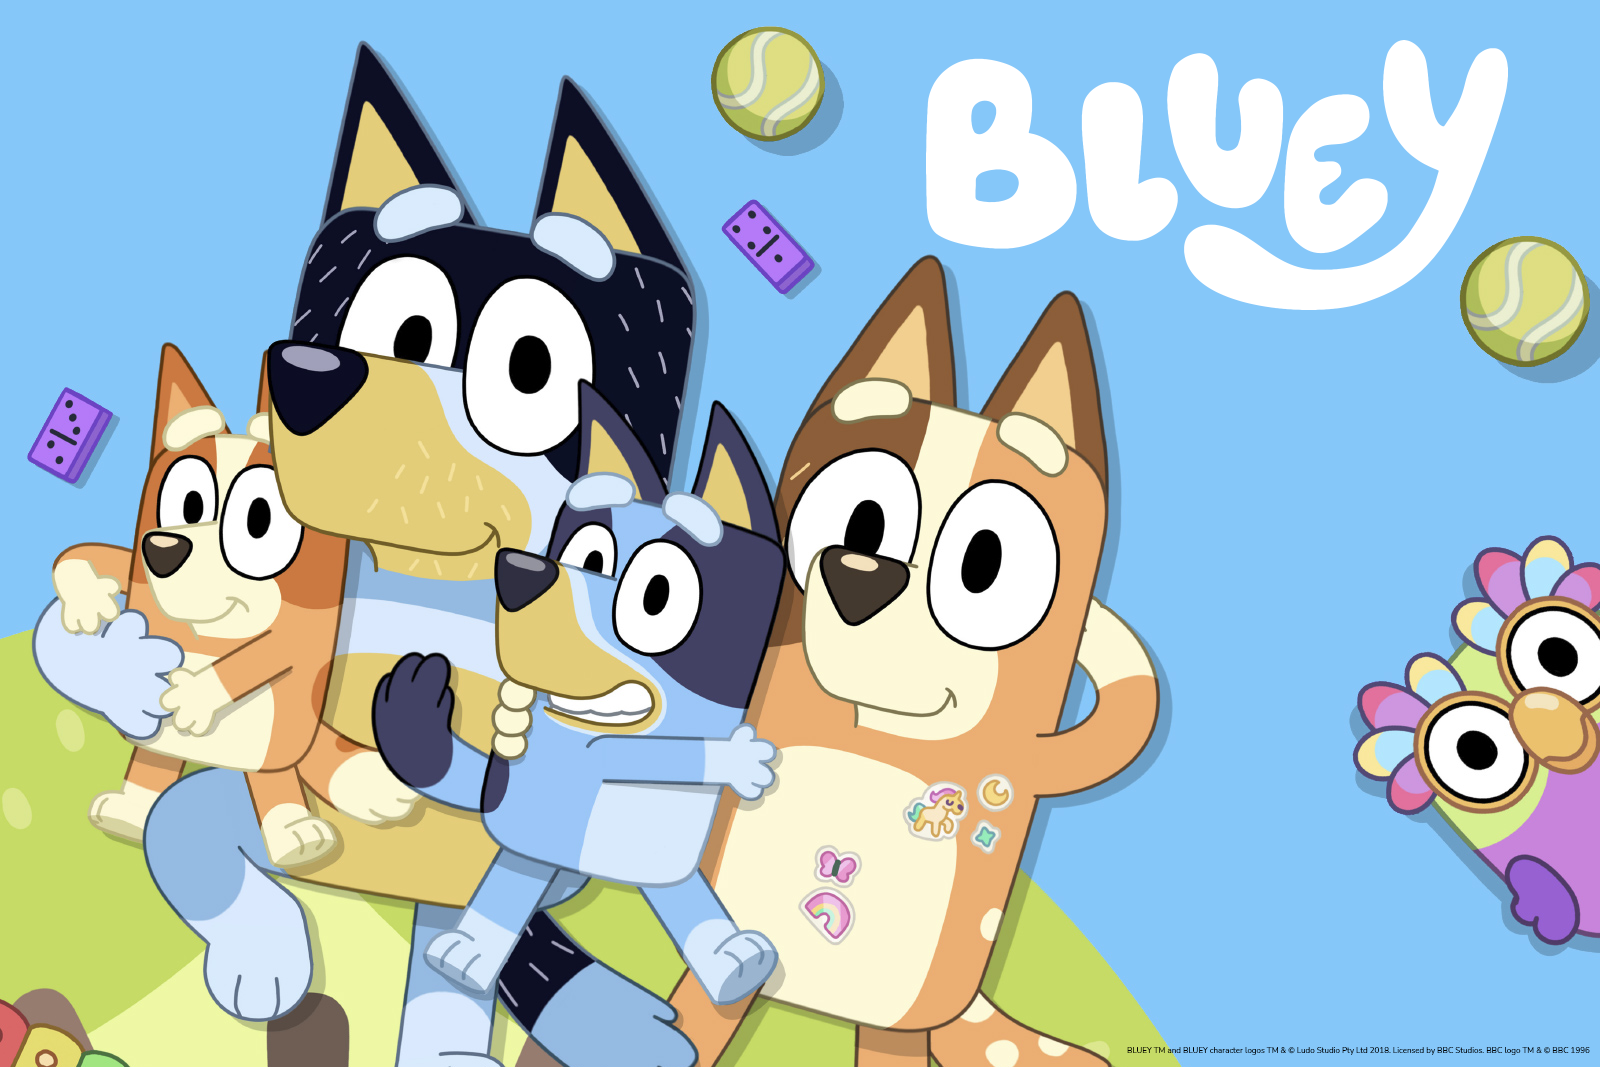 Bluey enjoys successful launch in Italy